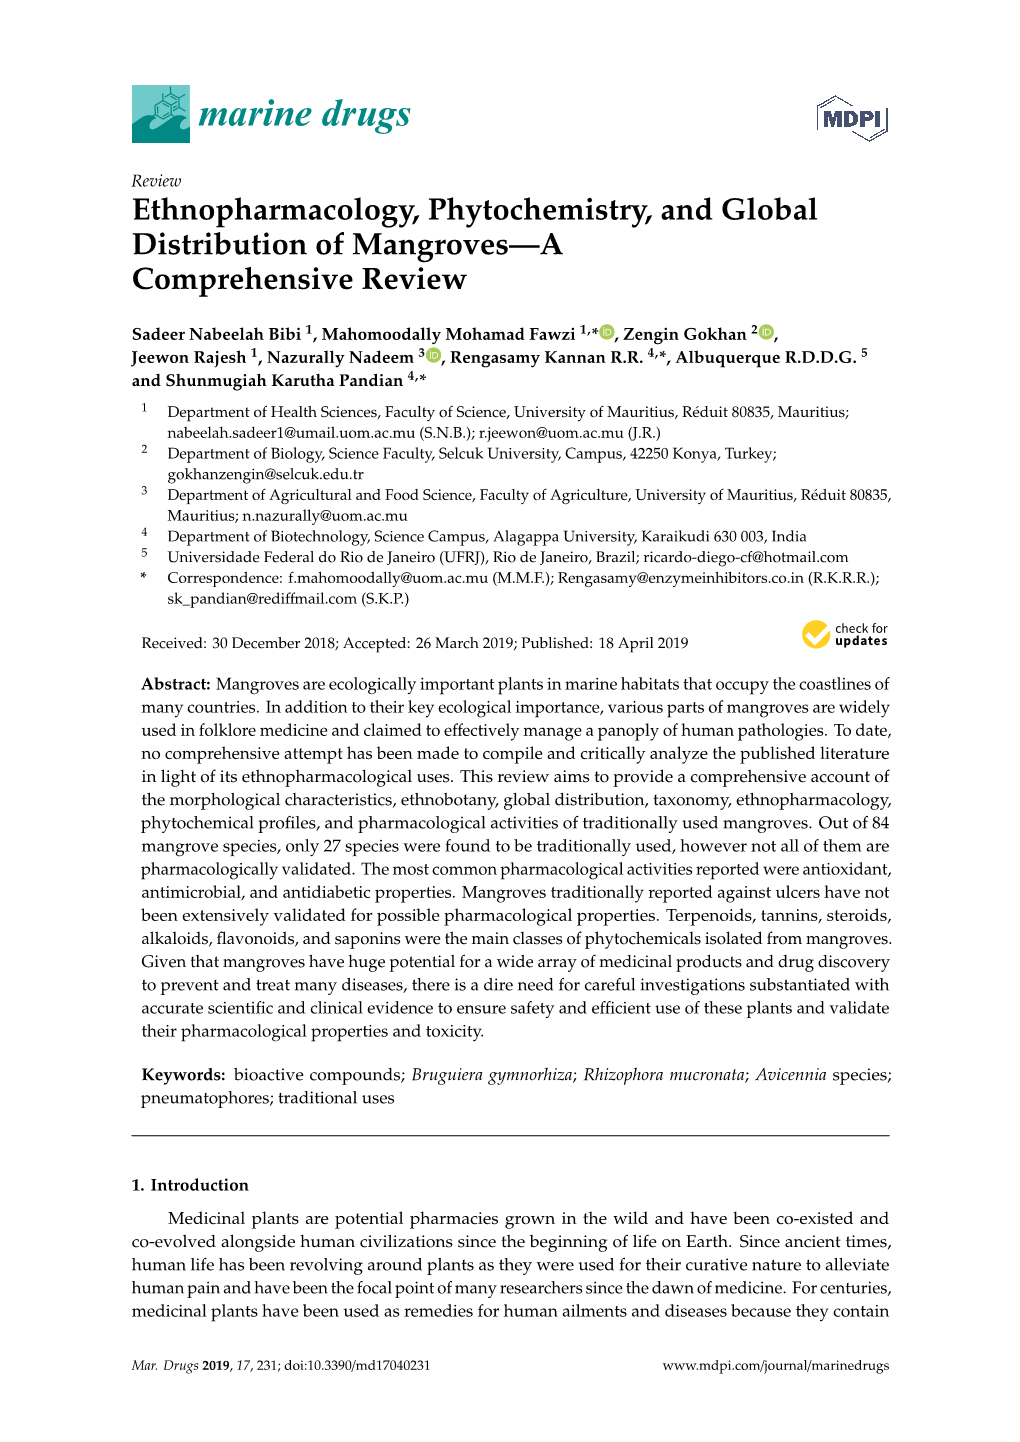 Ethnopharmacology, Phytochemistry, and Global Distribution of Mangroves—A Comprehensive Review